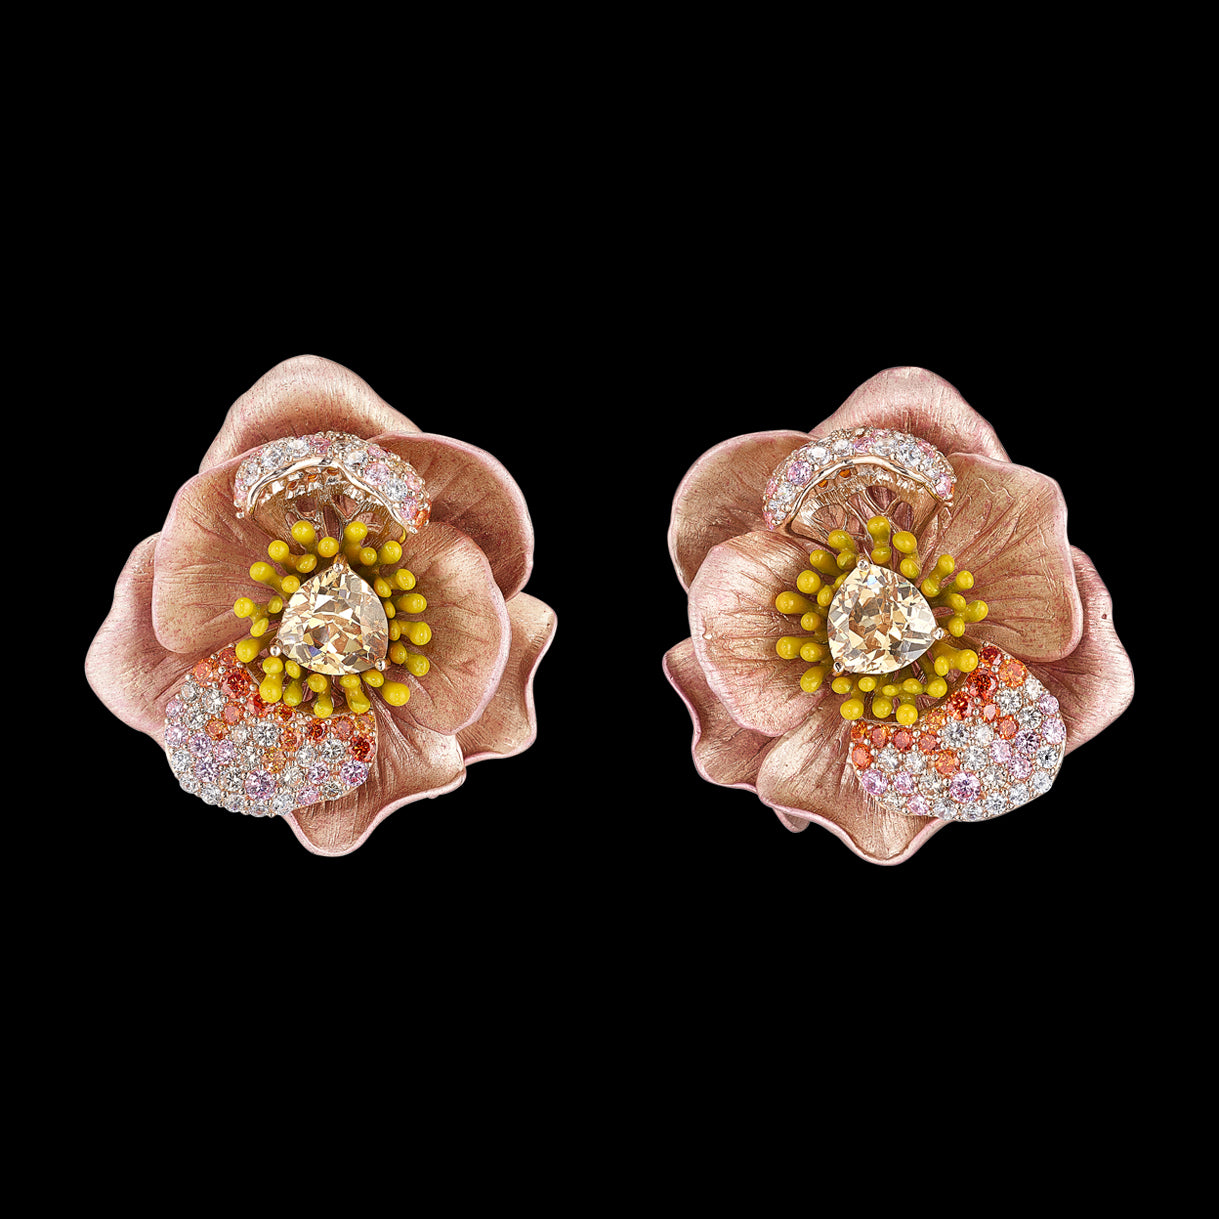 Blush Bloom Earrings, Earrings, Anabela Chan Joaillerie - Fine jewelry with laboratory grown and created gemstones hand-crafted in the United Kingdom. Anabela Chan Joaillerie is the first fine jewellery brand in the world to champion laboratory-grown and created gemstones with high jewellery design, artisanal craftsmanship and a focus on ethical and sustainable innovations.